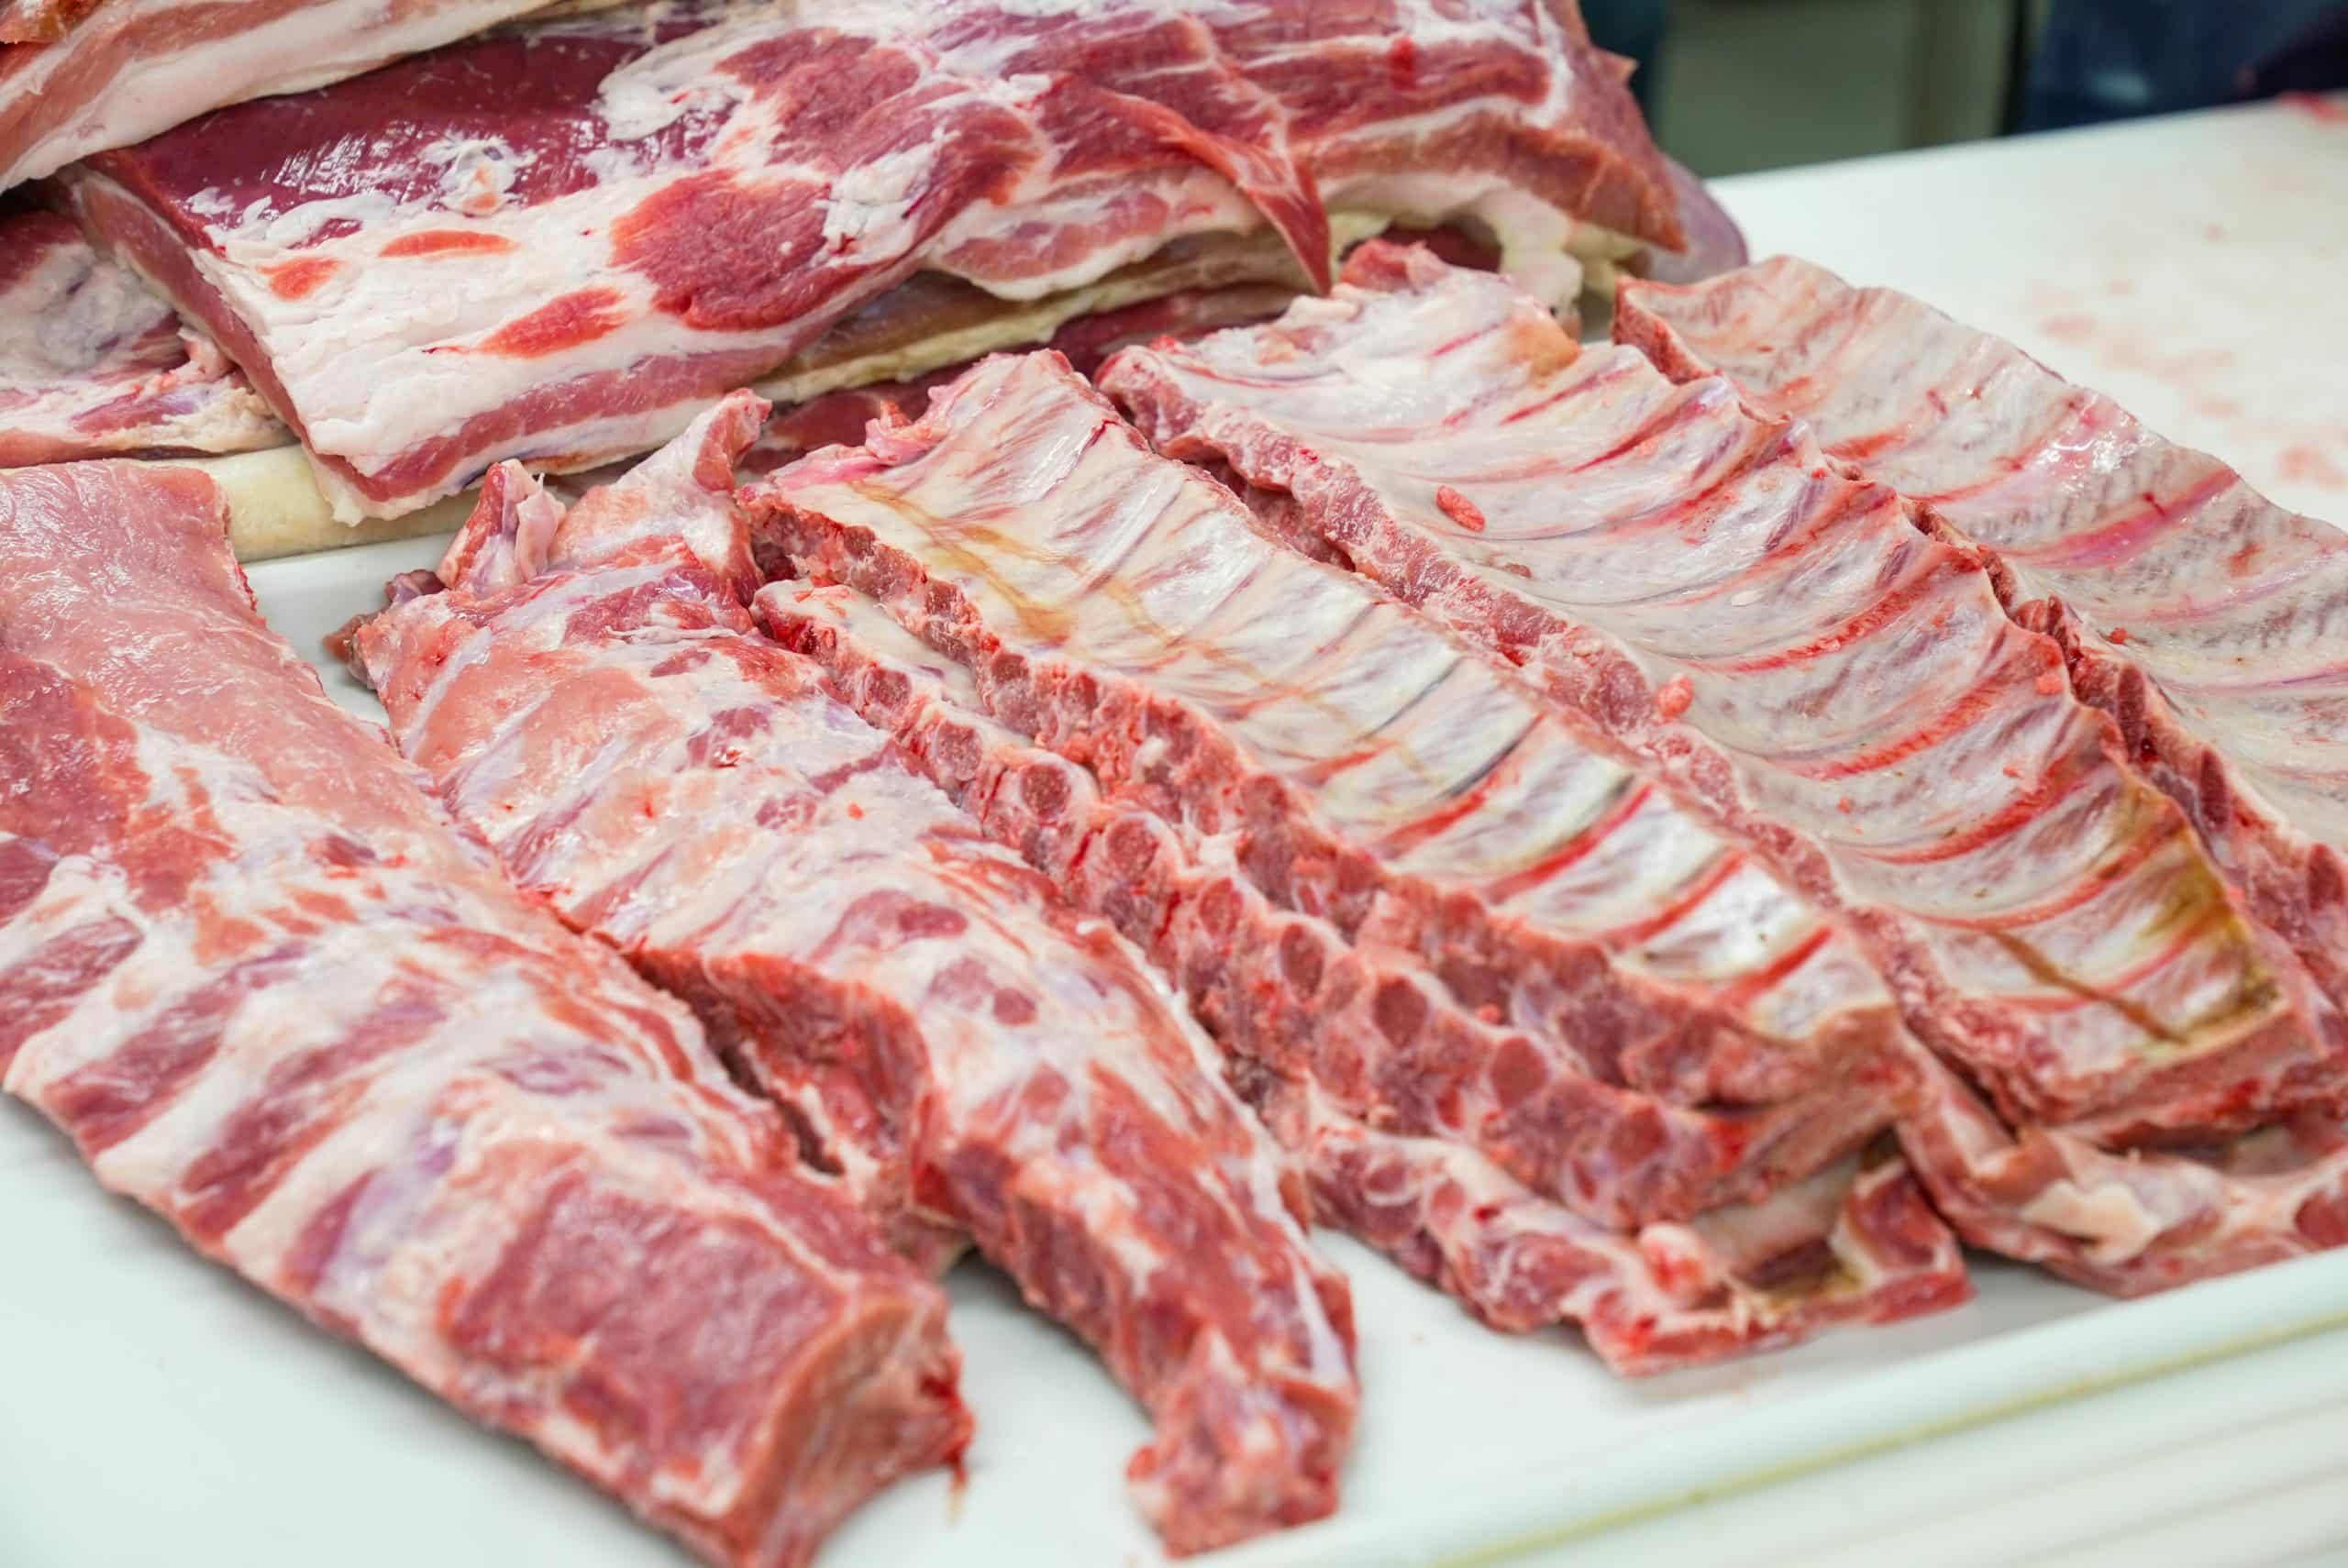 Mastering Large-Scale Meat Preparation for Events